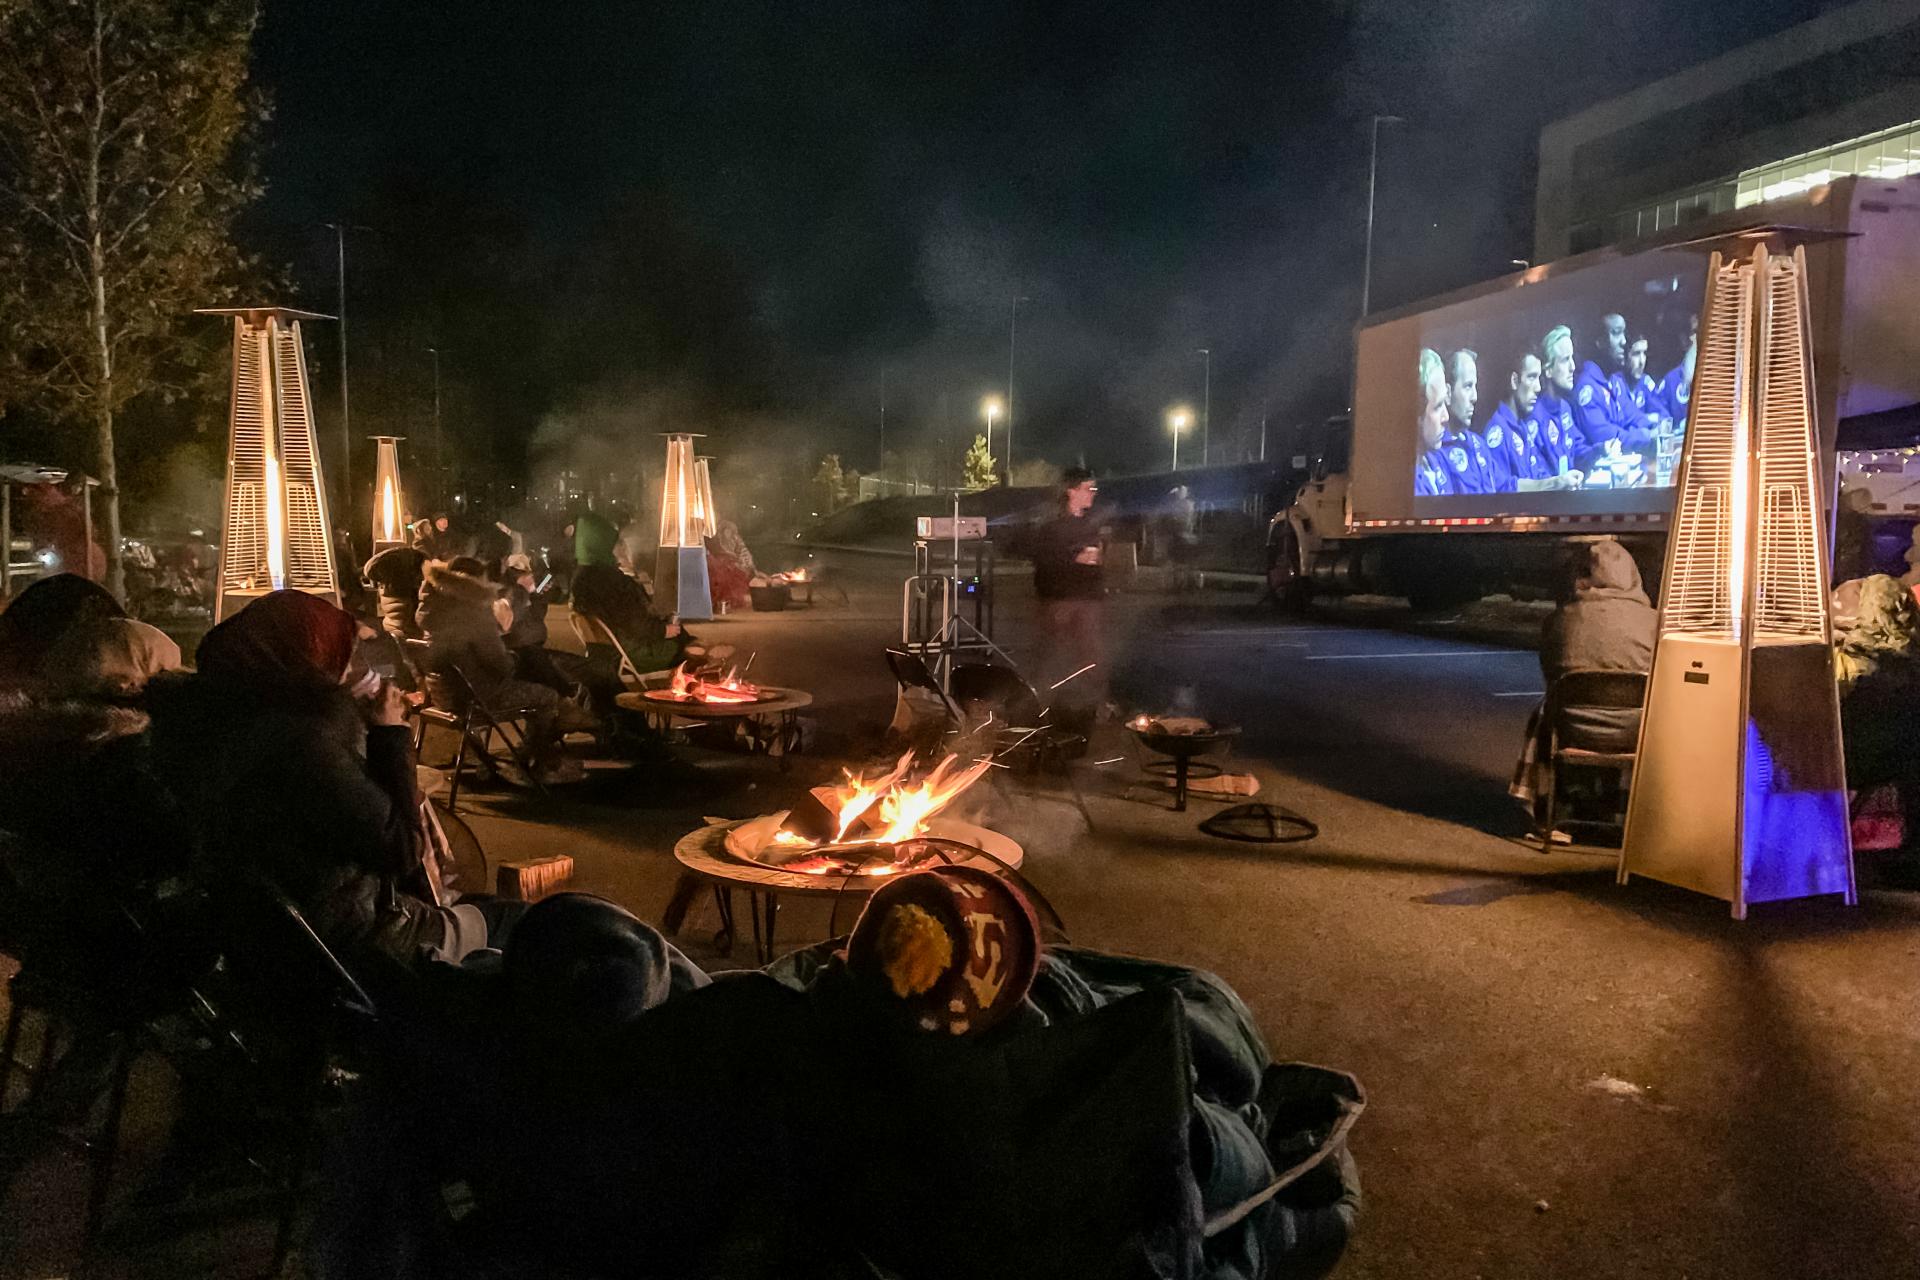 People sit outside wrapped in blankets watching a movie with heaters around them